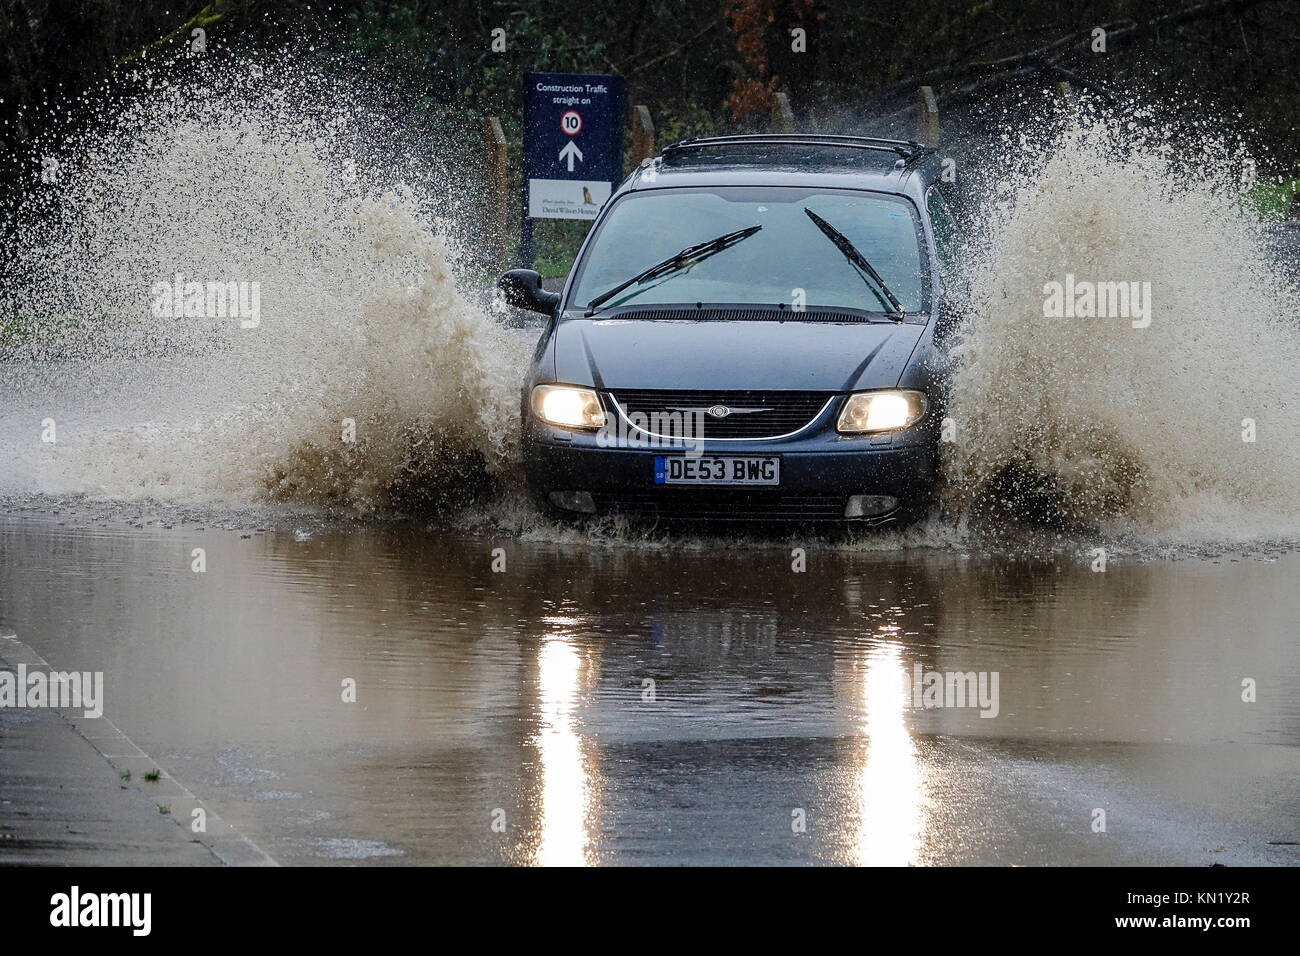 Sycamore Avenue, Godalming. 10th December 2017. An intense and fast-moving low pressure depression hit the south of England this morning bringing storm force winds and heavy rainfall. Flooding in Godalming in Surrey. Credit: james jagger/Alamy Live News Stock Photo